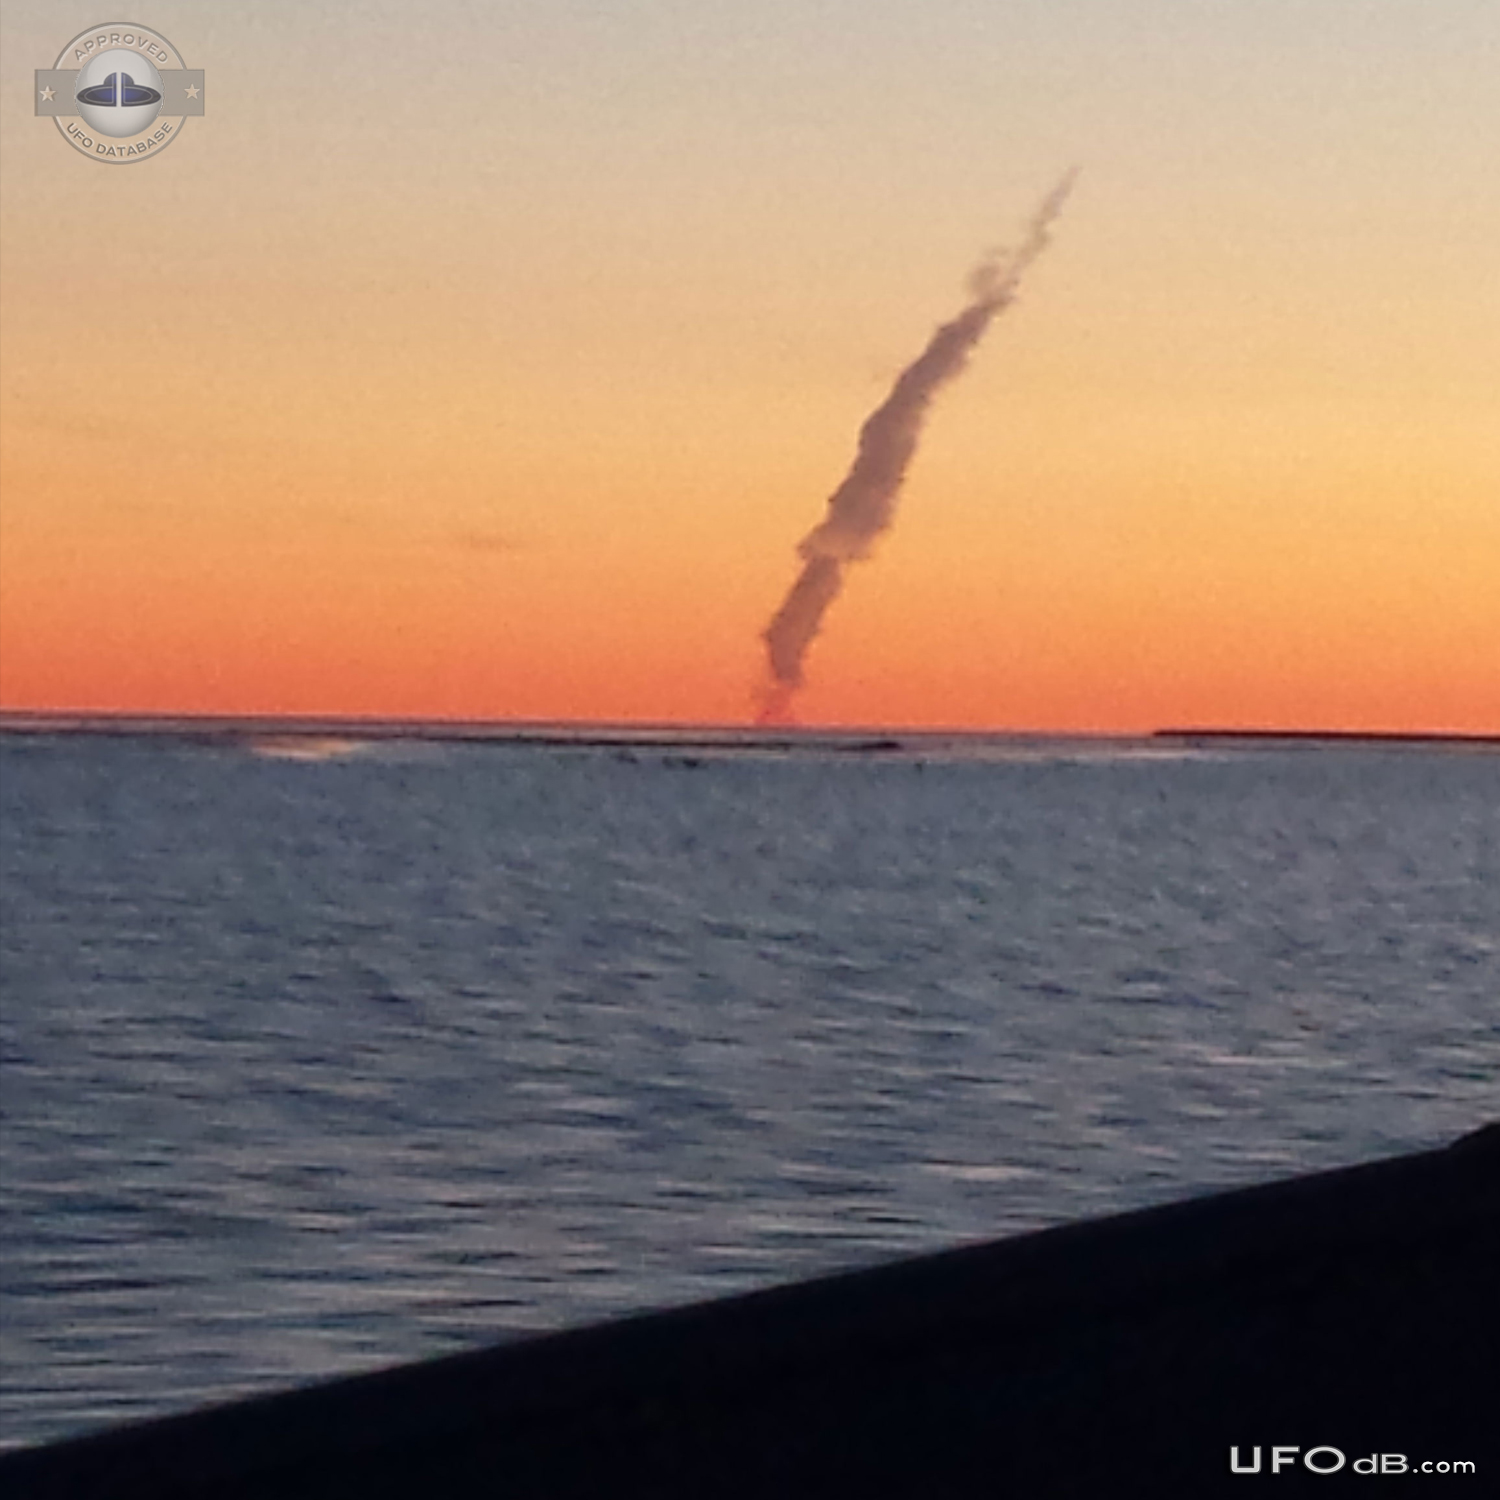 UFO leave the water straight up out in 5 seconds Alakanuk, Alaska USA UFO Picture #621-1